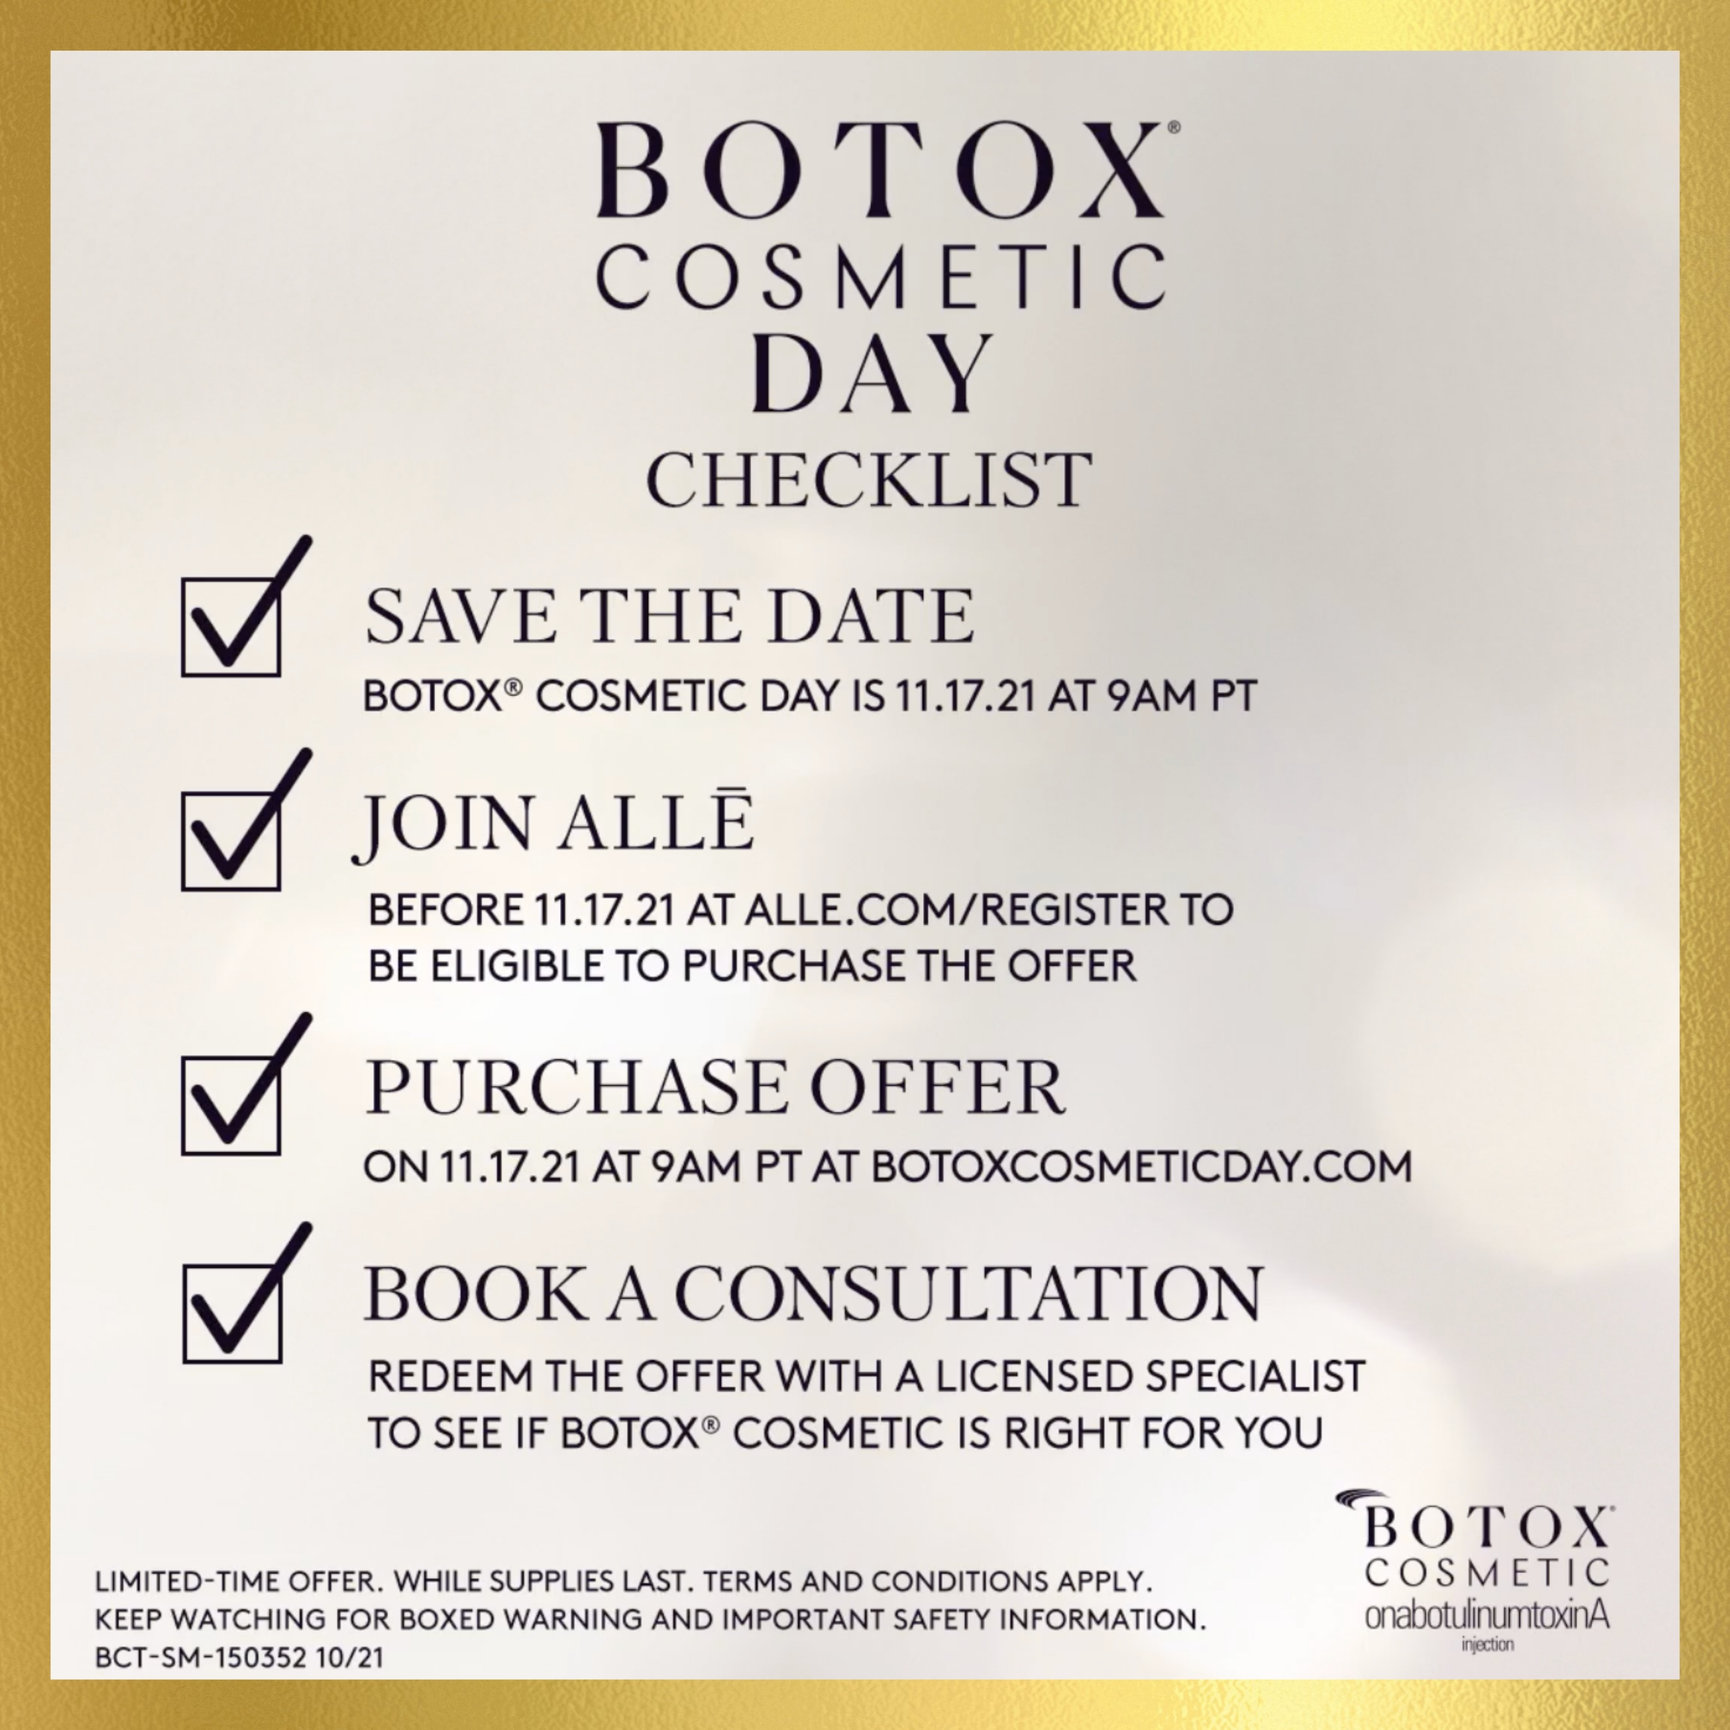 Botox Cosmetic Day Checklist Feel Ideal 360 Med Spa Southlake, TX